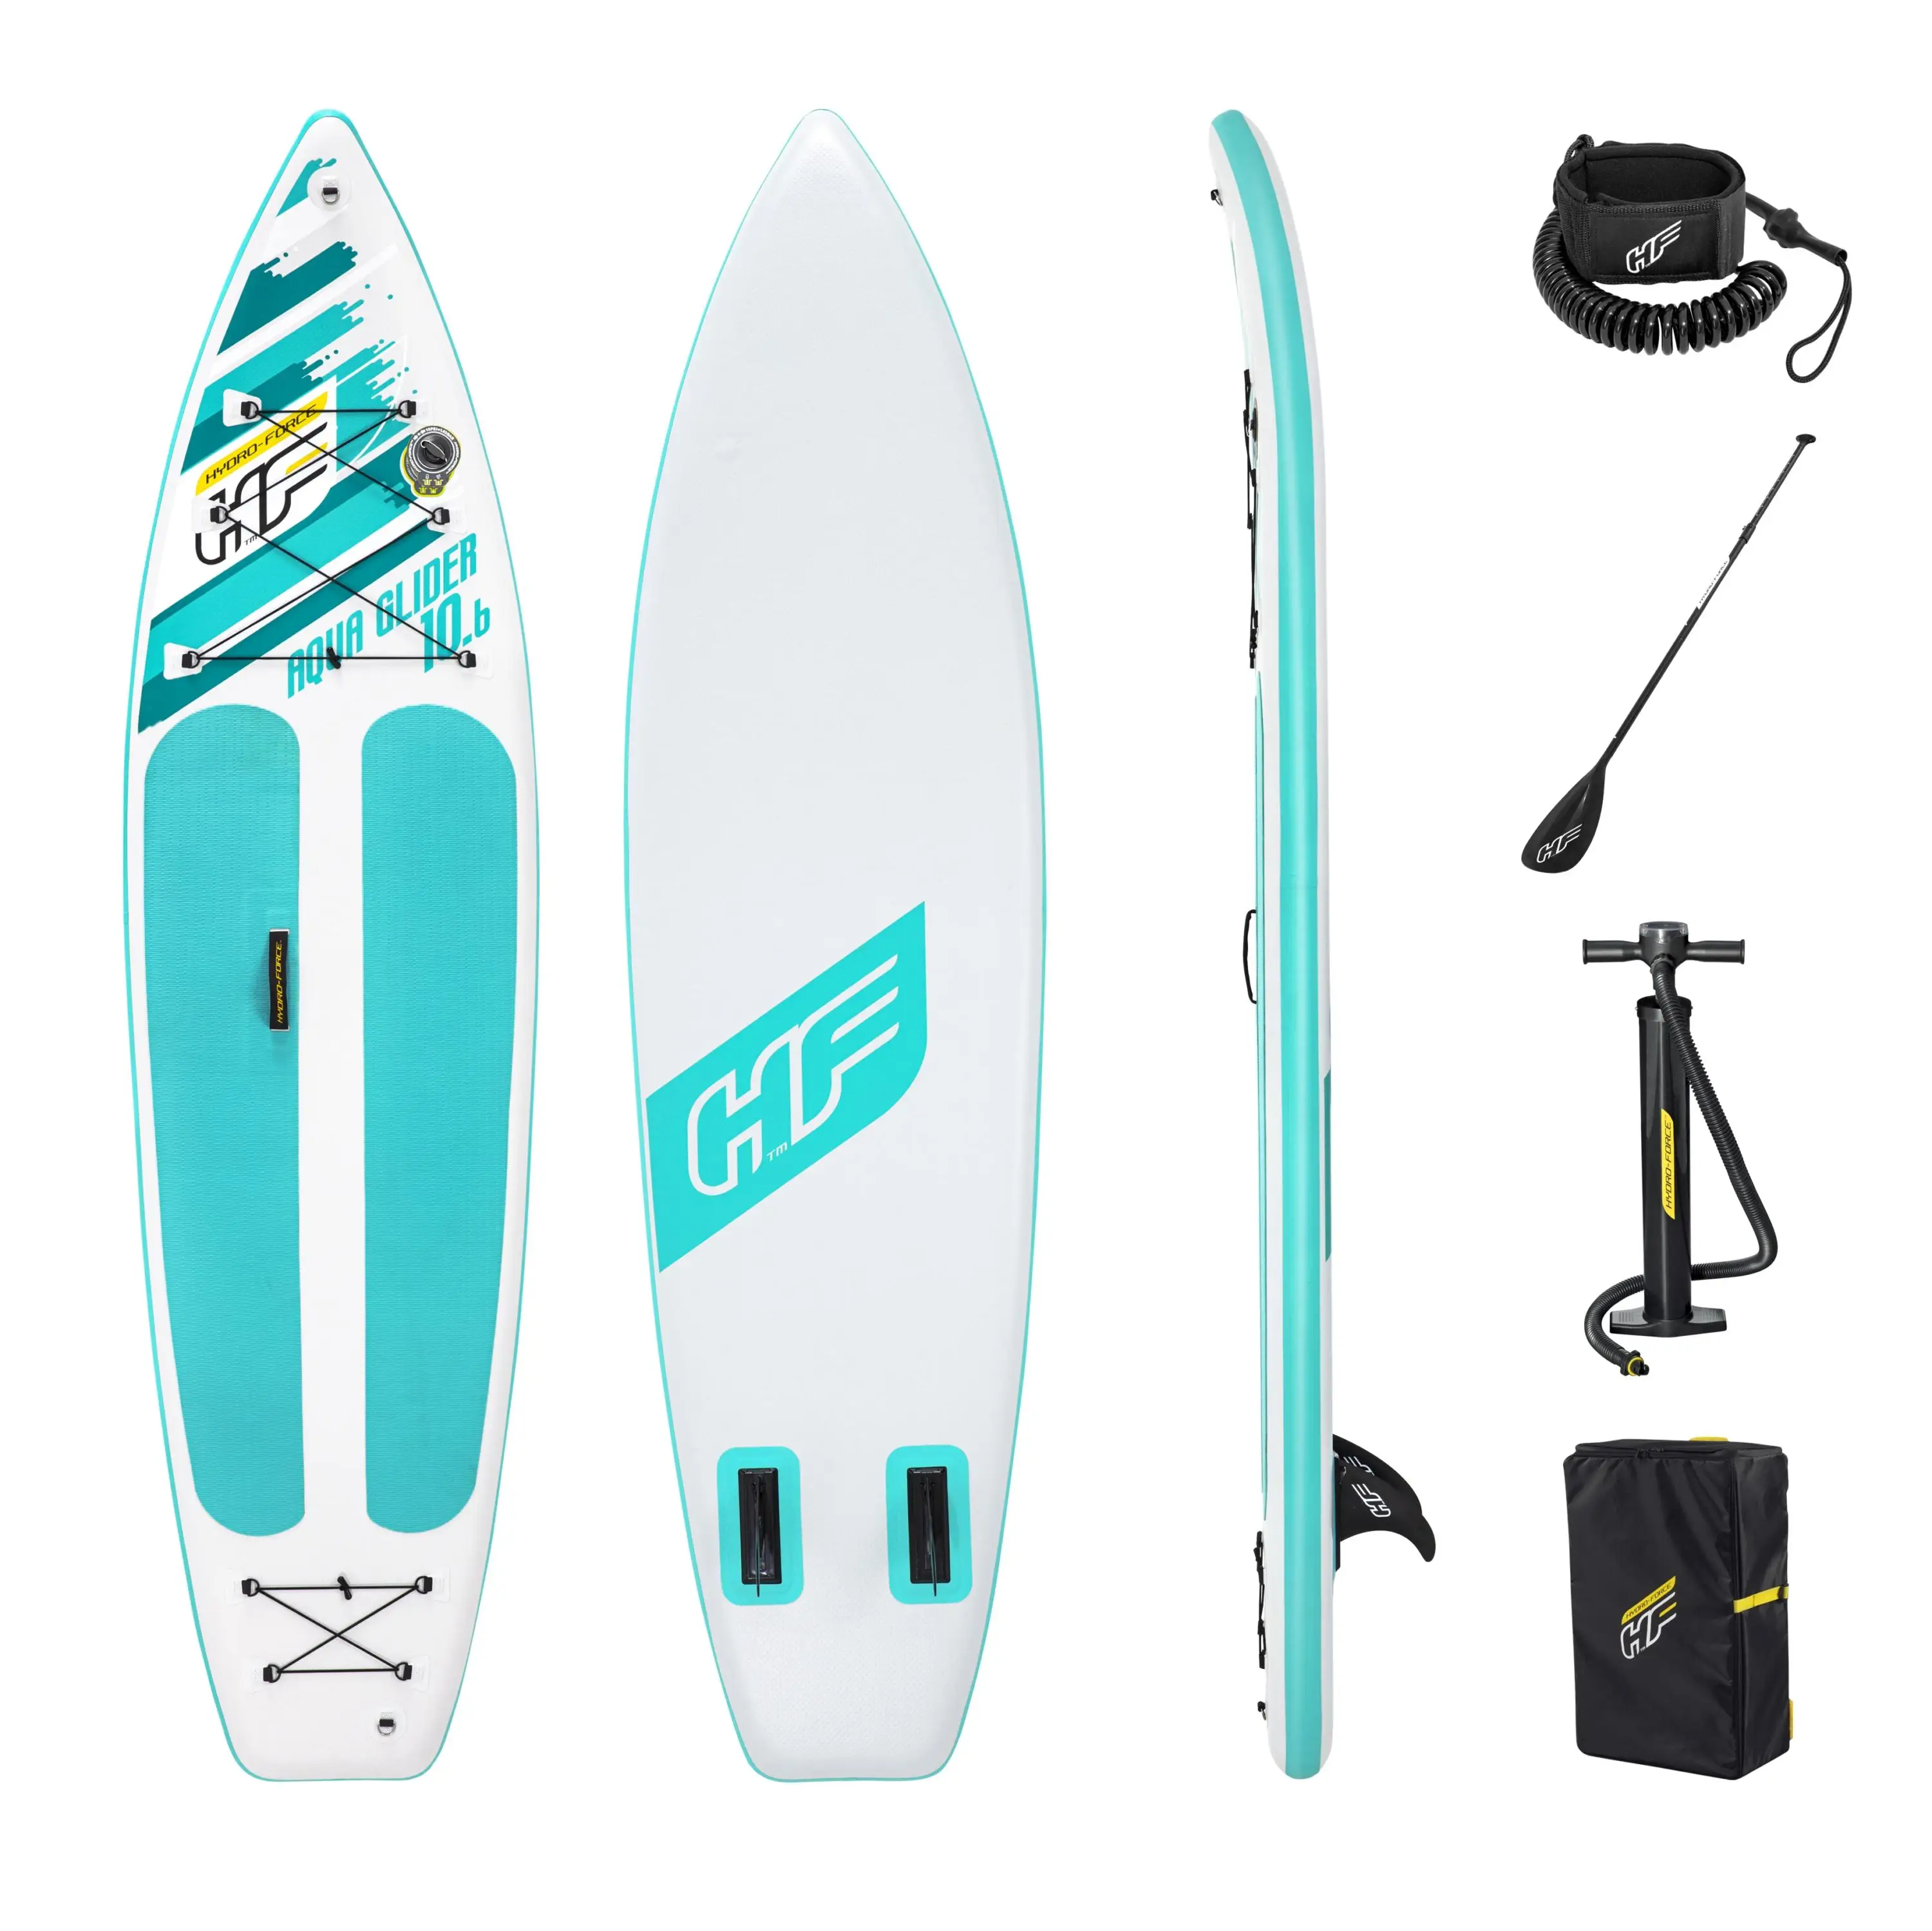 Bestway 2021 320cm Sup With Paddle Hydro-force 79cm X 12cm Glide Surfboard Set - Buy Nsp Paddle Board,Bestway Inflatable Paddle Board,320cm Board Product on Alibaba.com